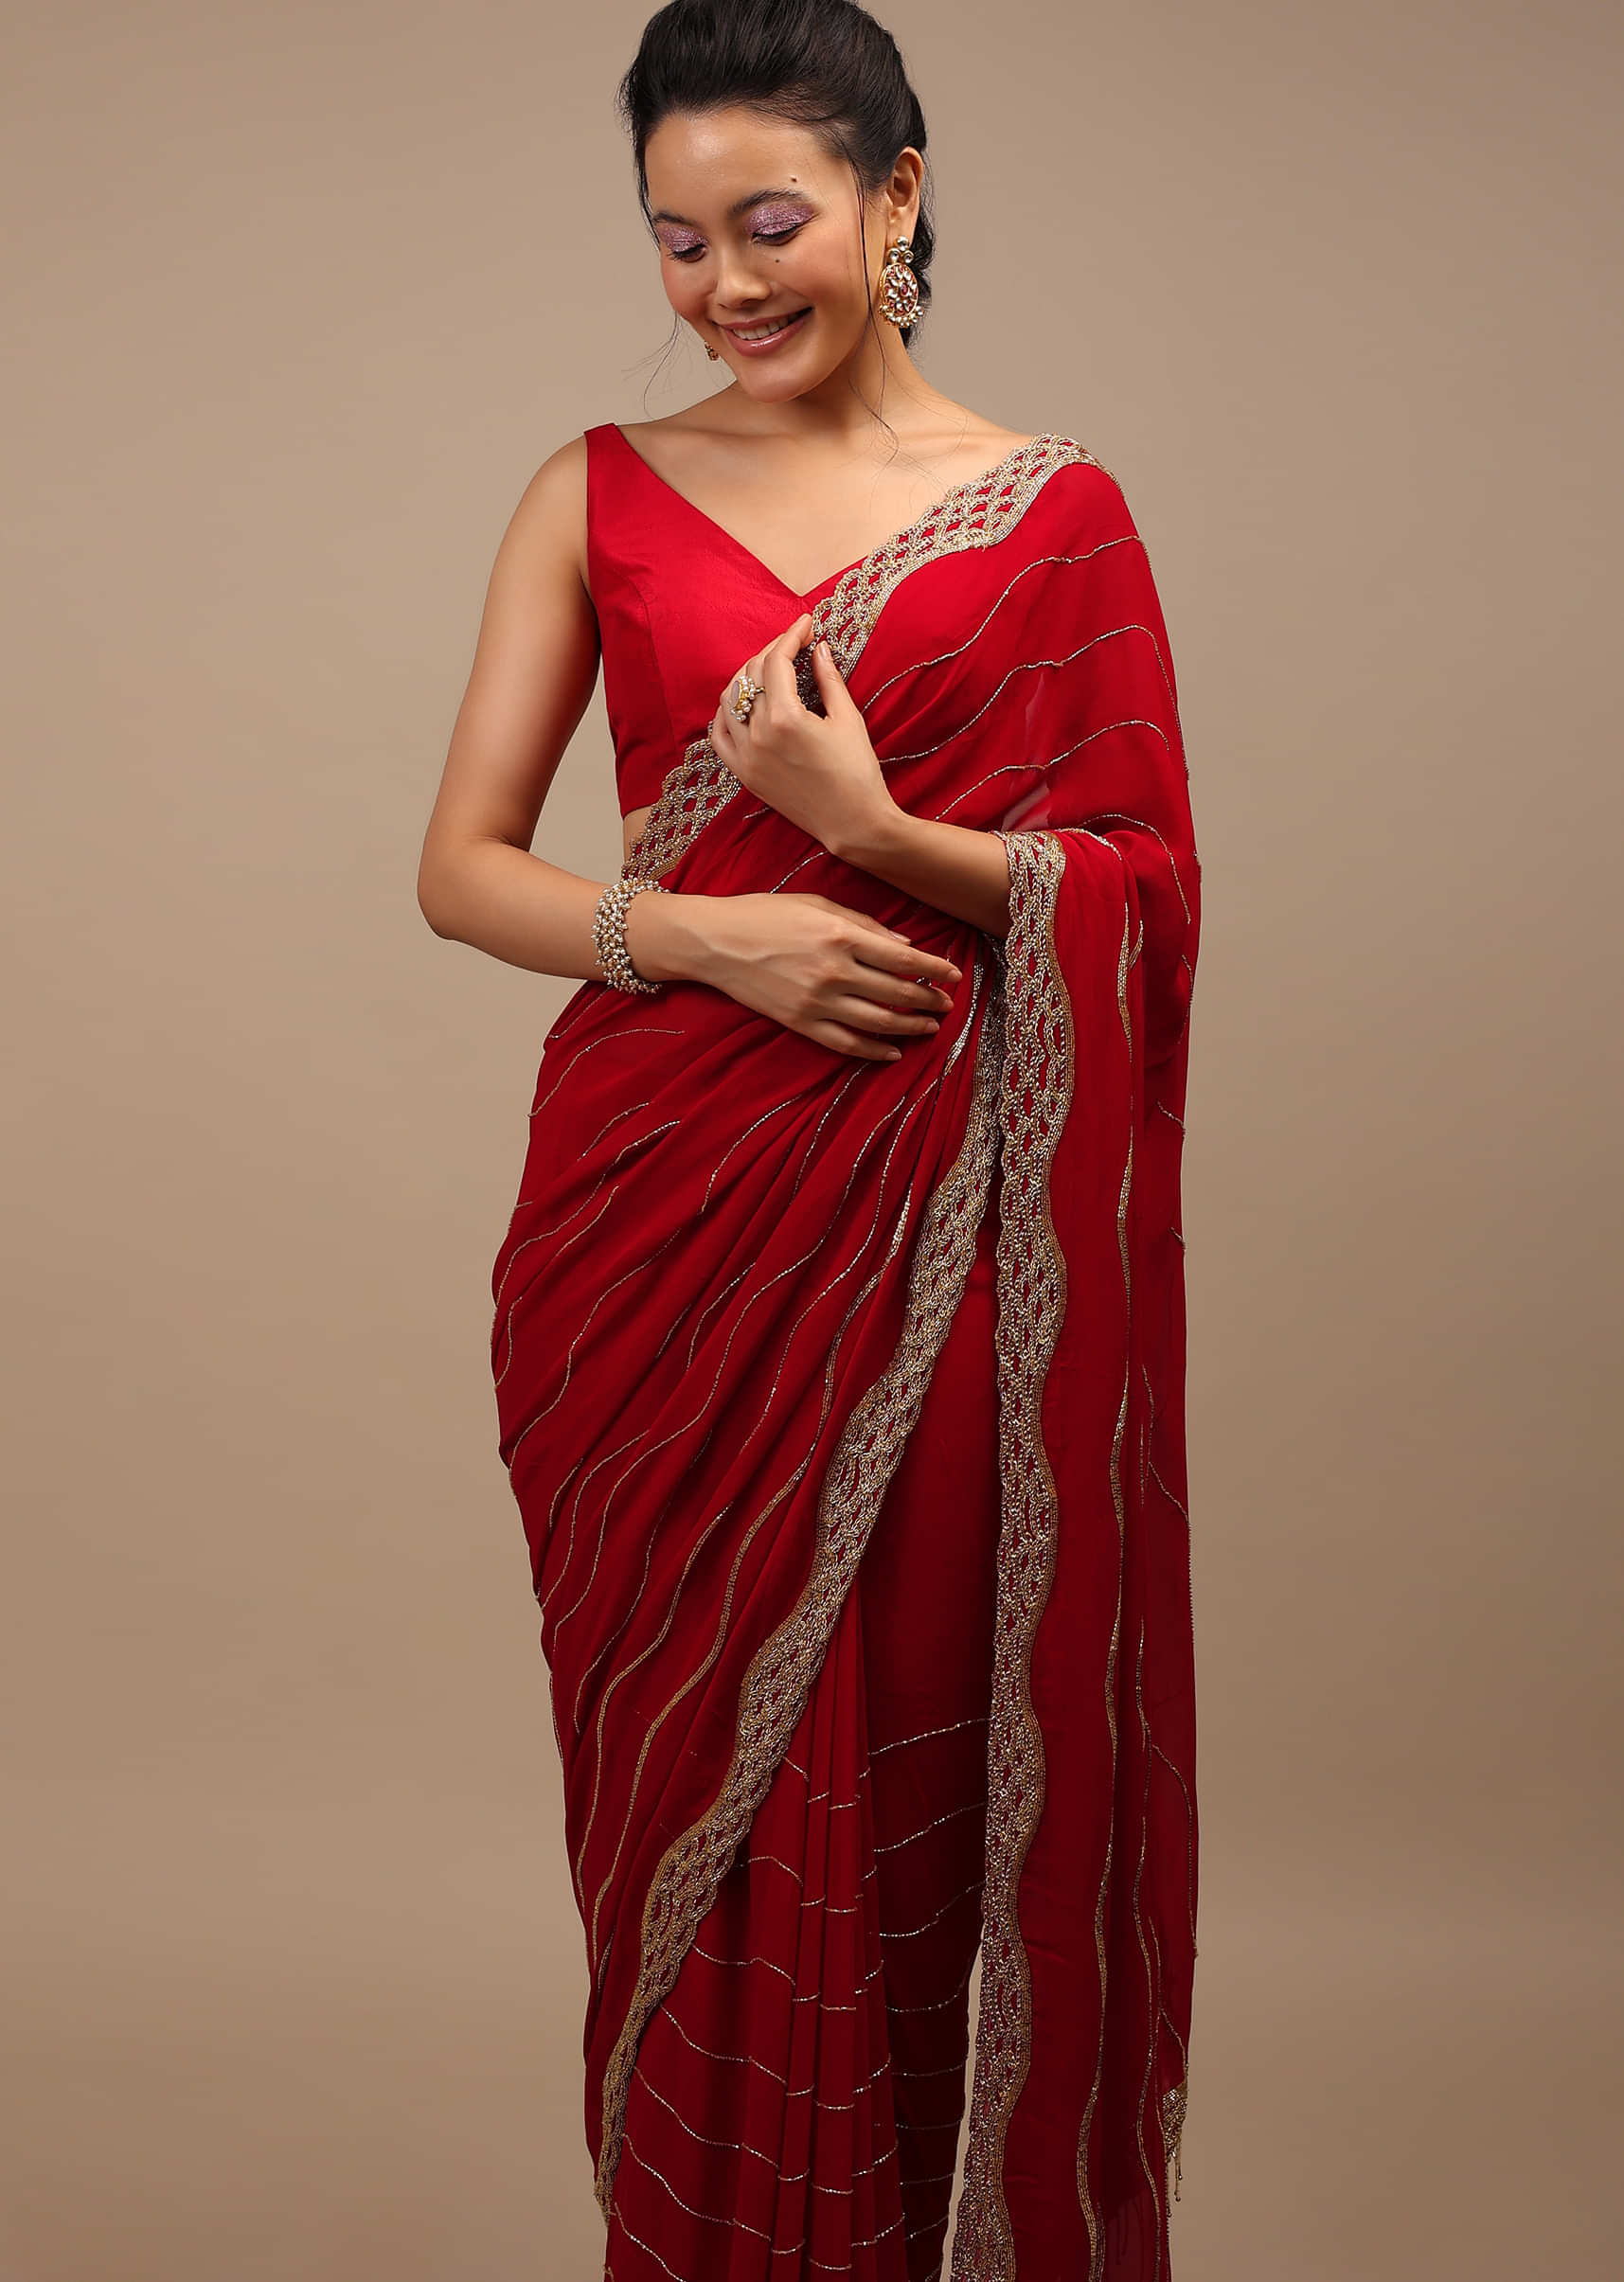 Lipstick Red Georgette Saree Adorned With Golden Zardozi Embroidery & Detailing, And Cut Dana Fringes